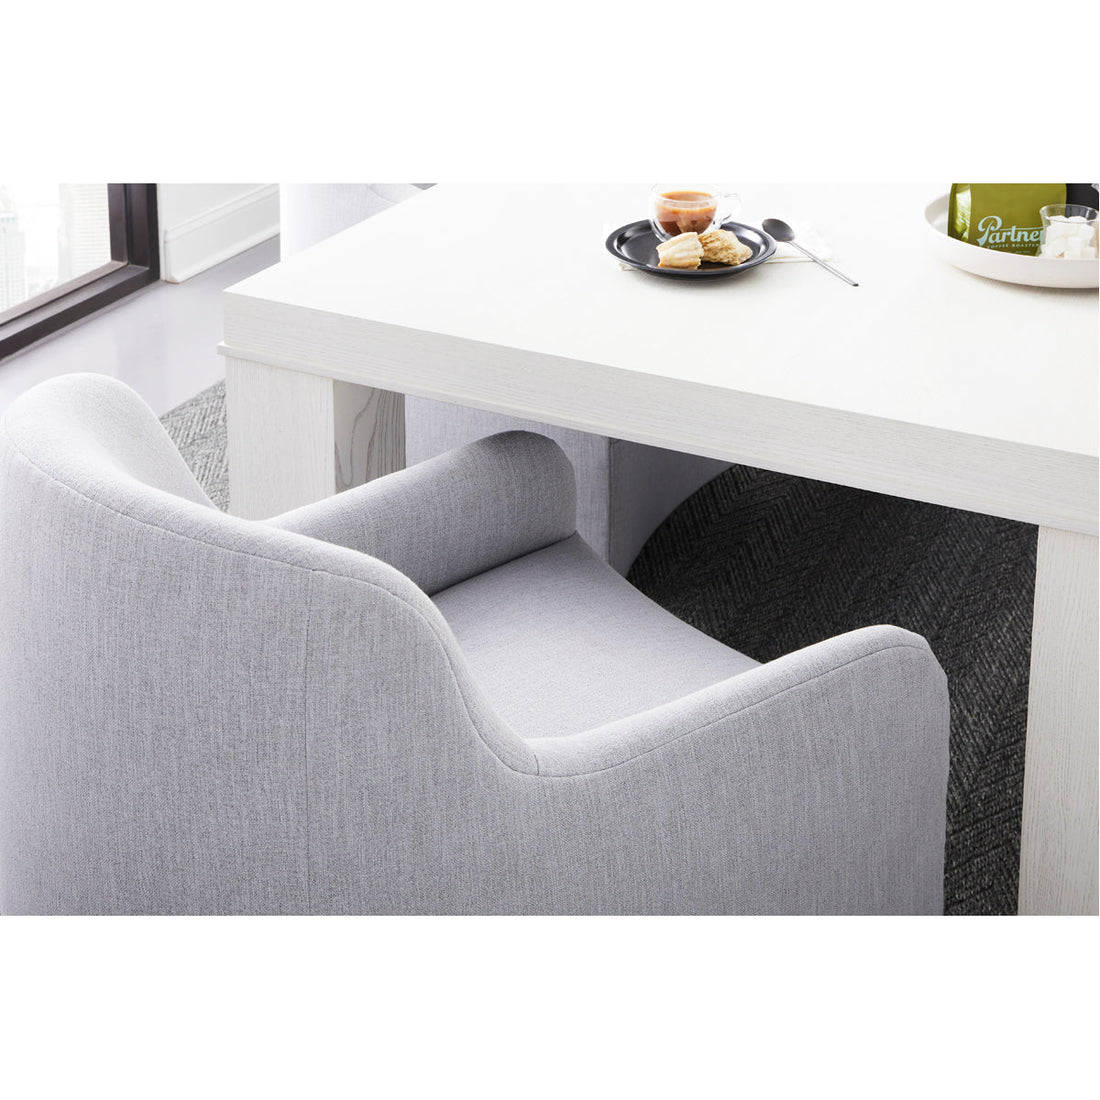 Vanguard Furniture Parson Dining Table with Parson Leg